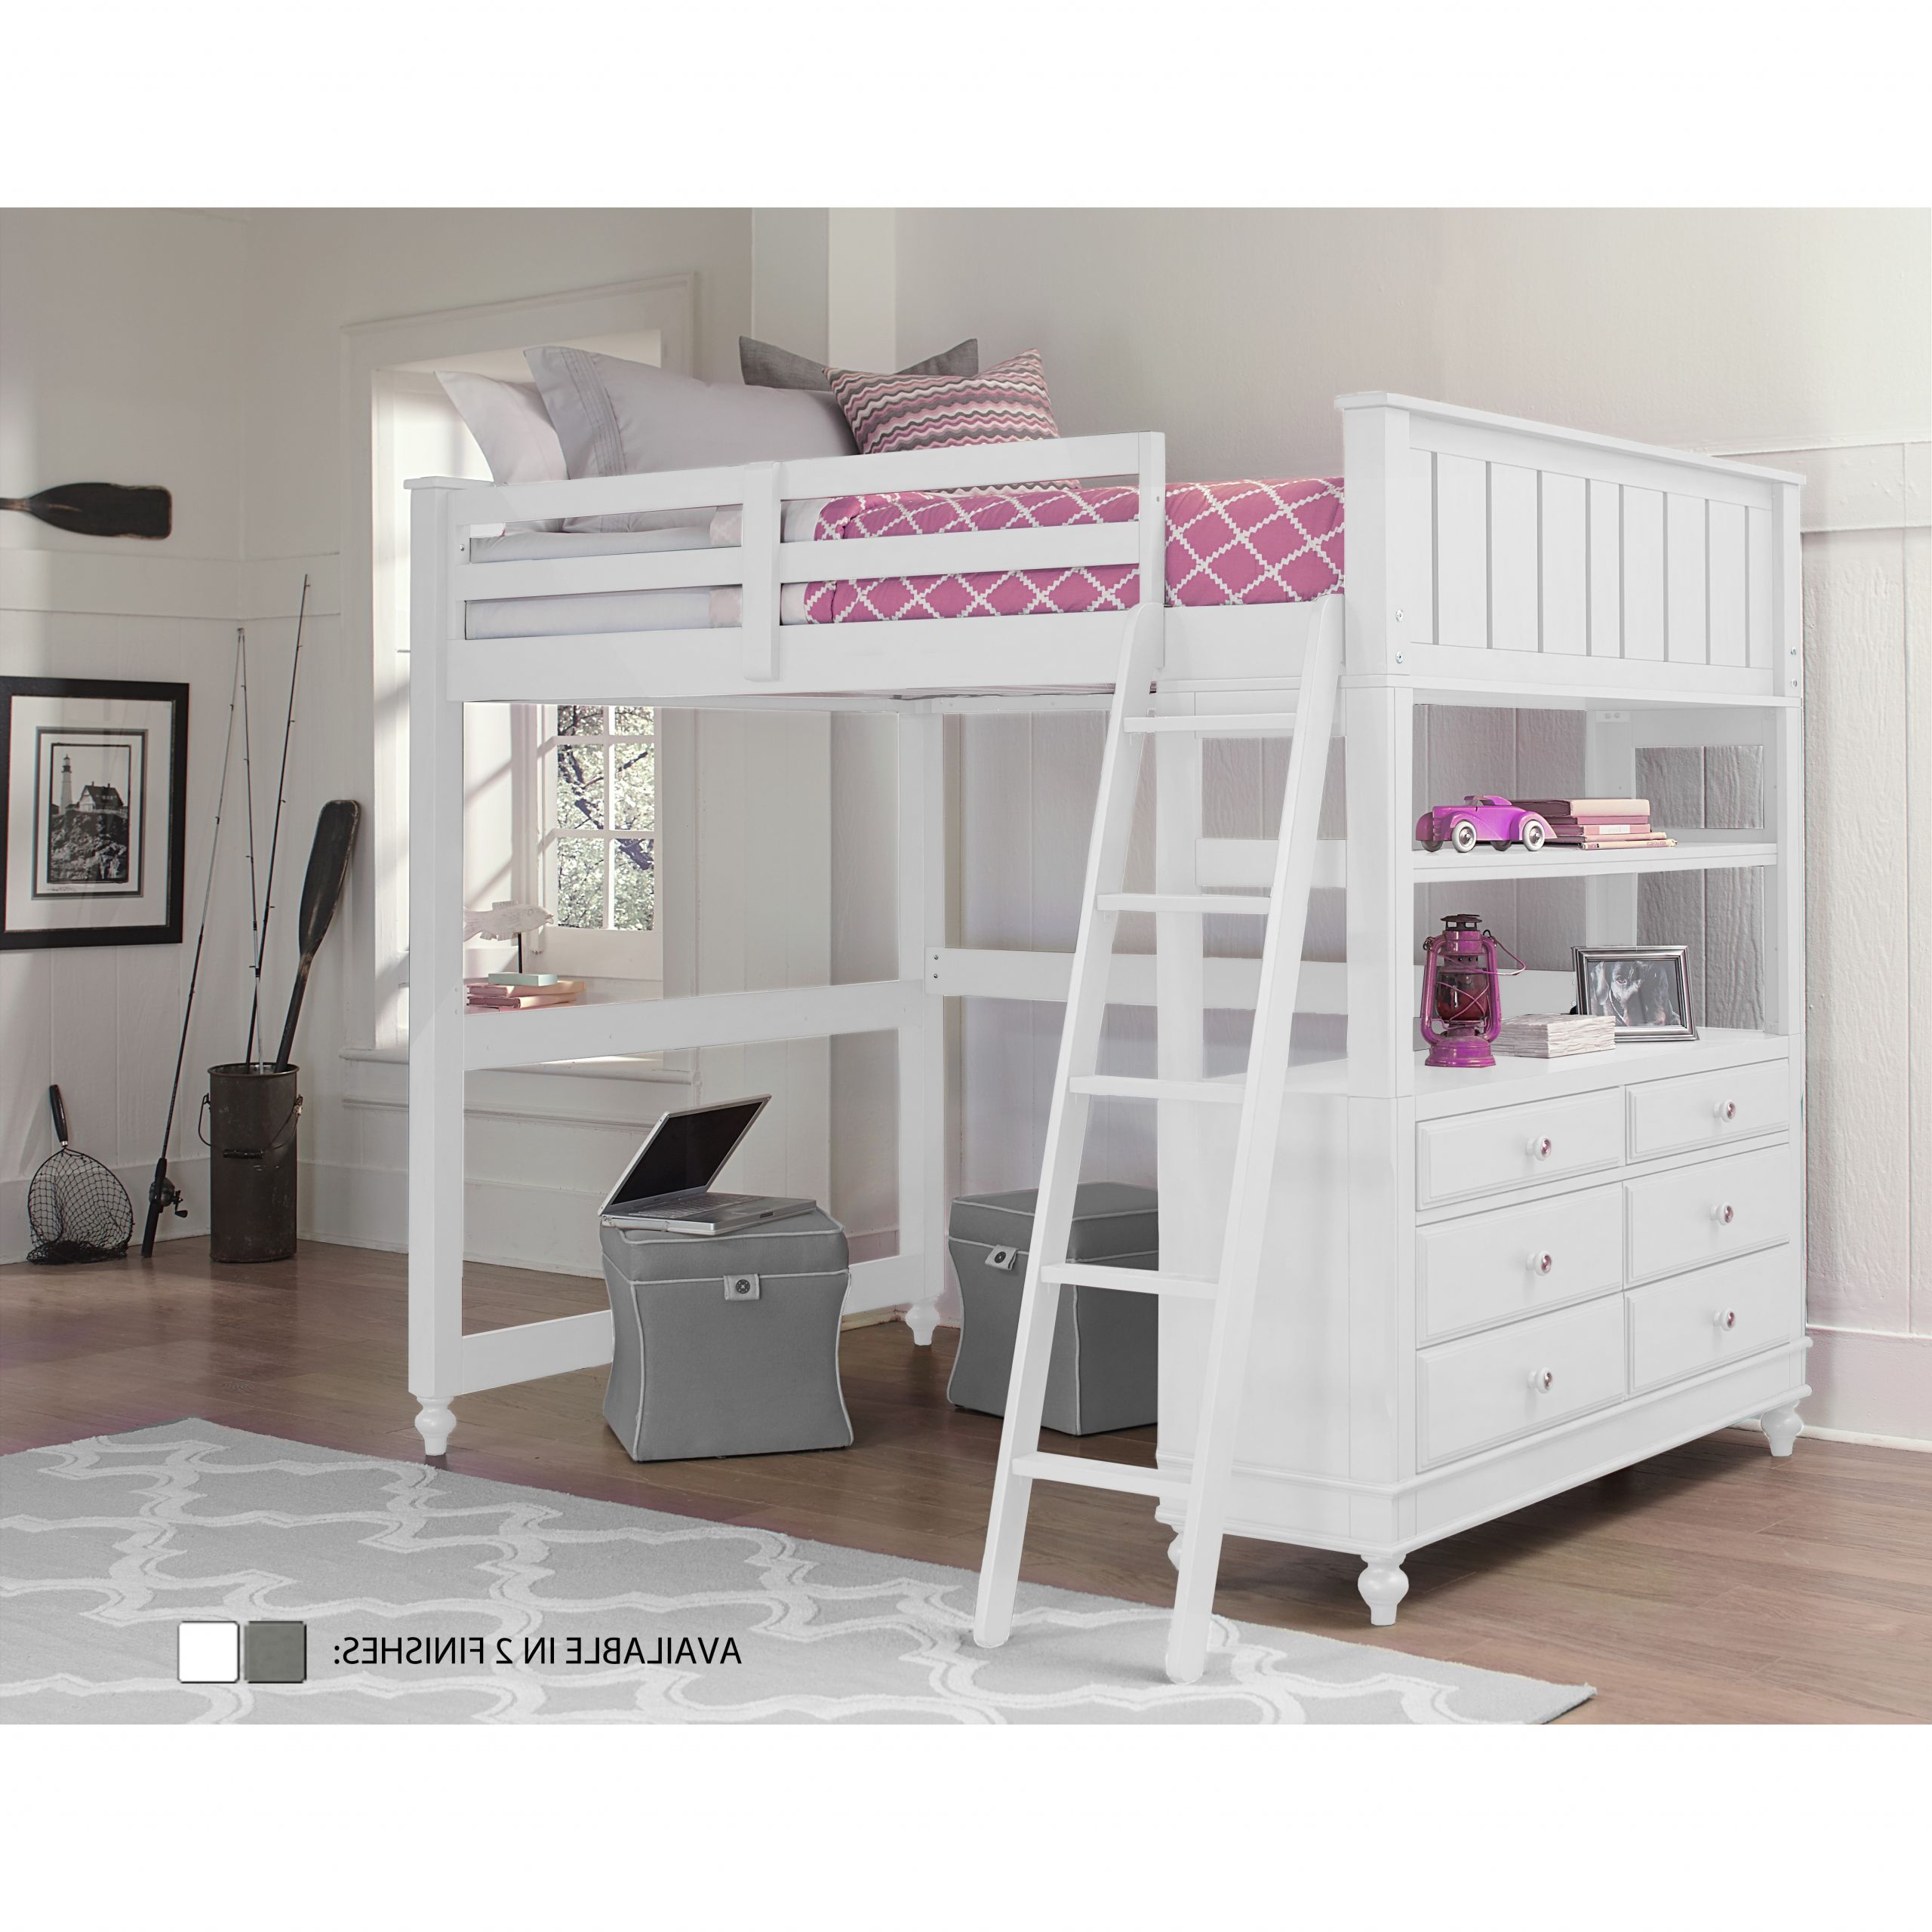 Room To Go Kids Clearance
 Bedroom Affordable Bedroom Decor For Kidsroomstogo Ideas